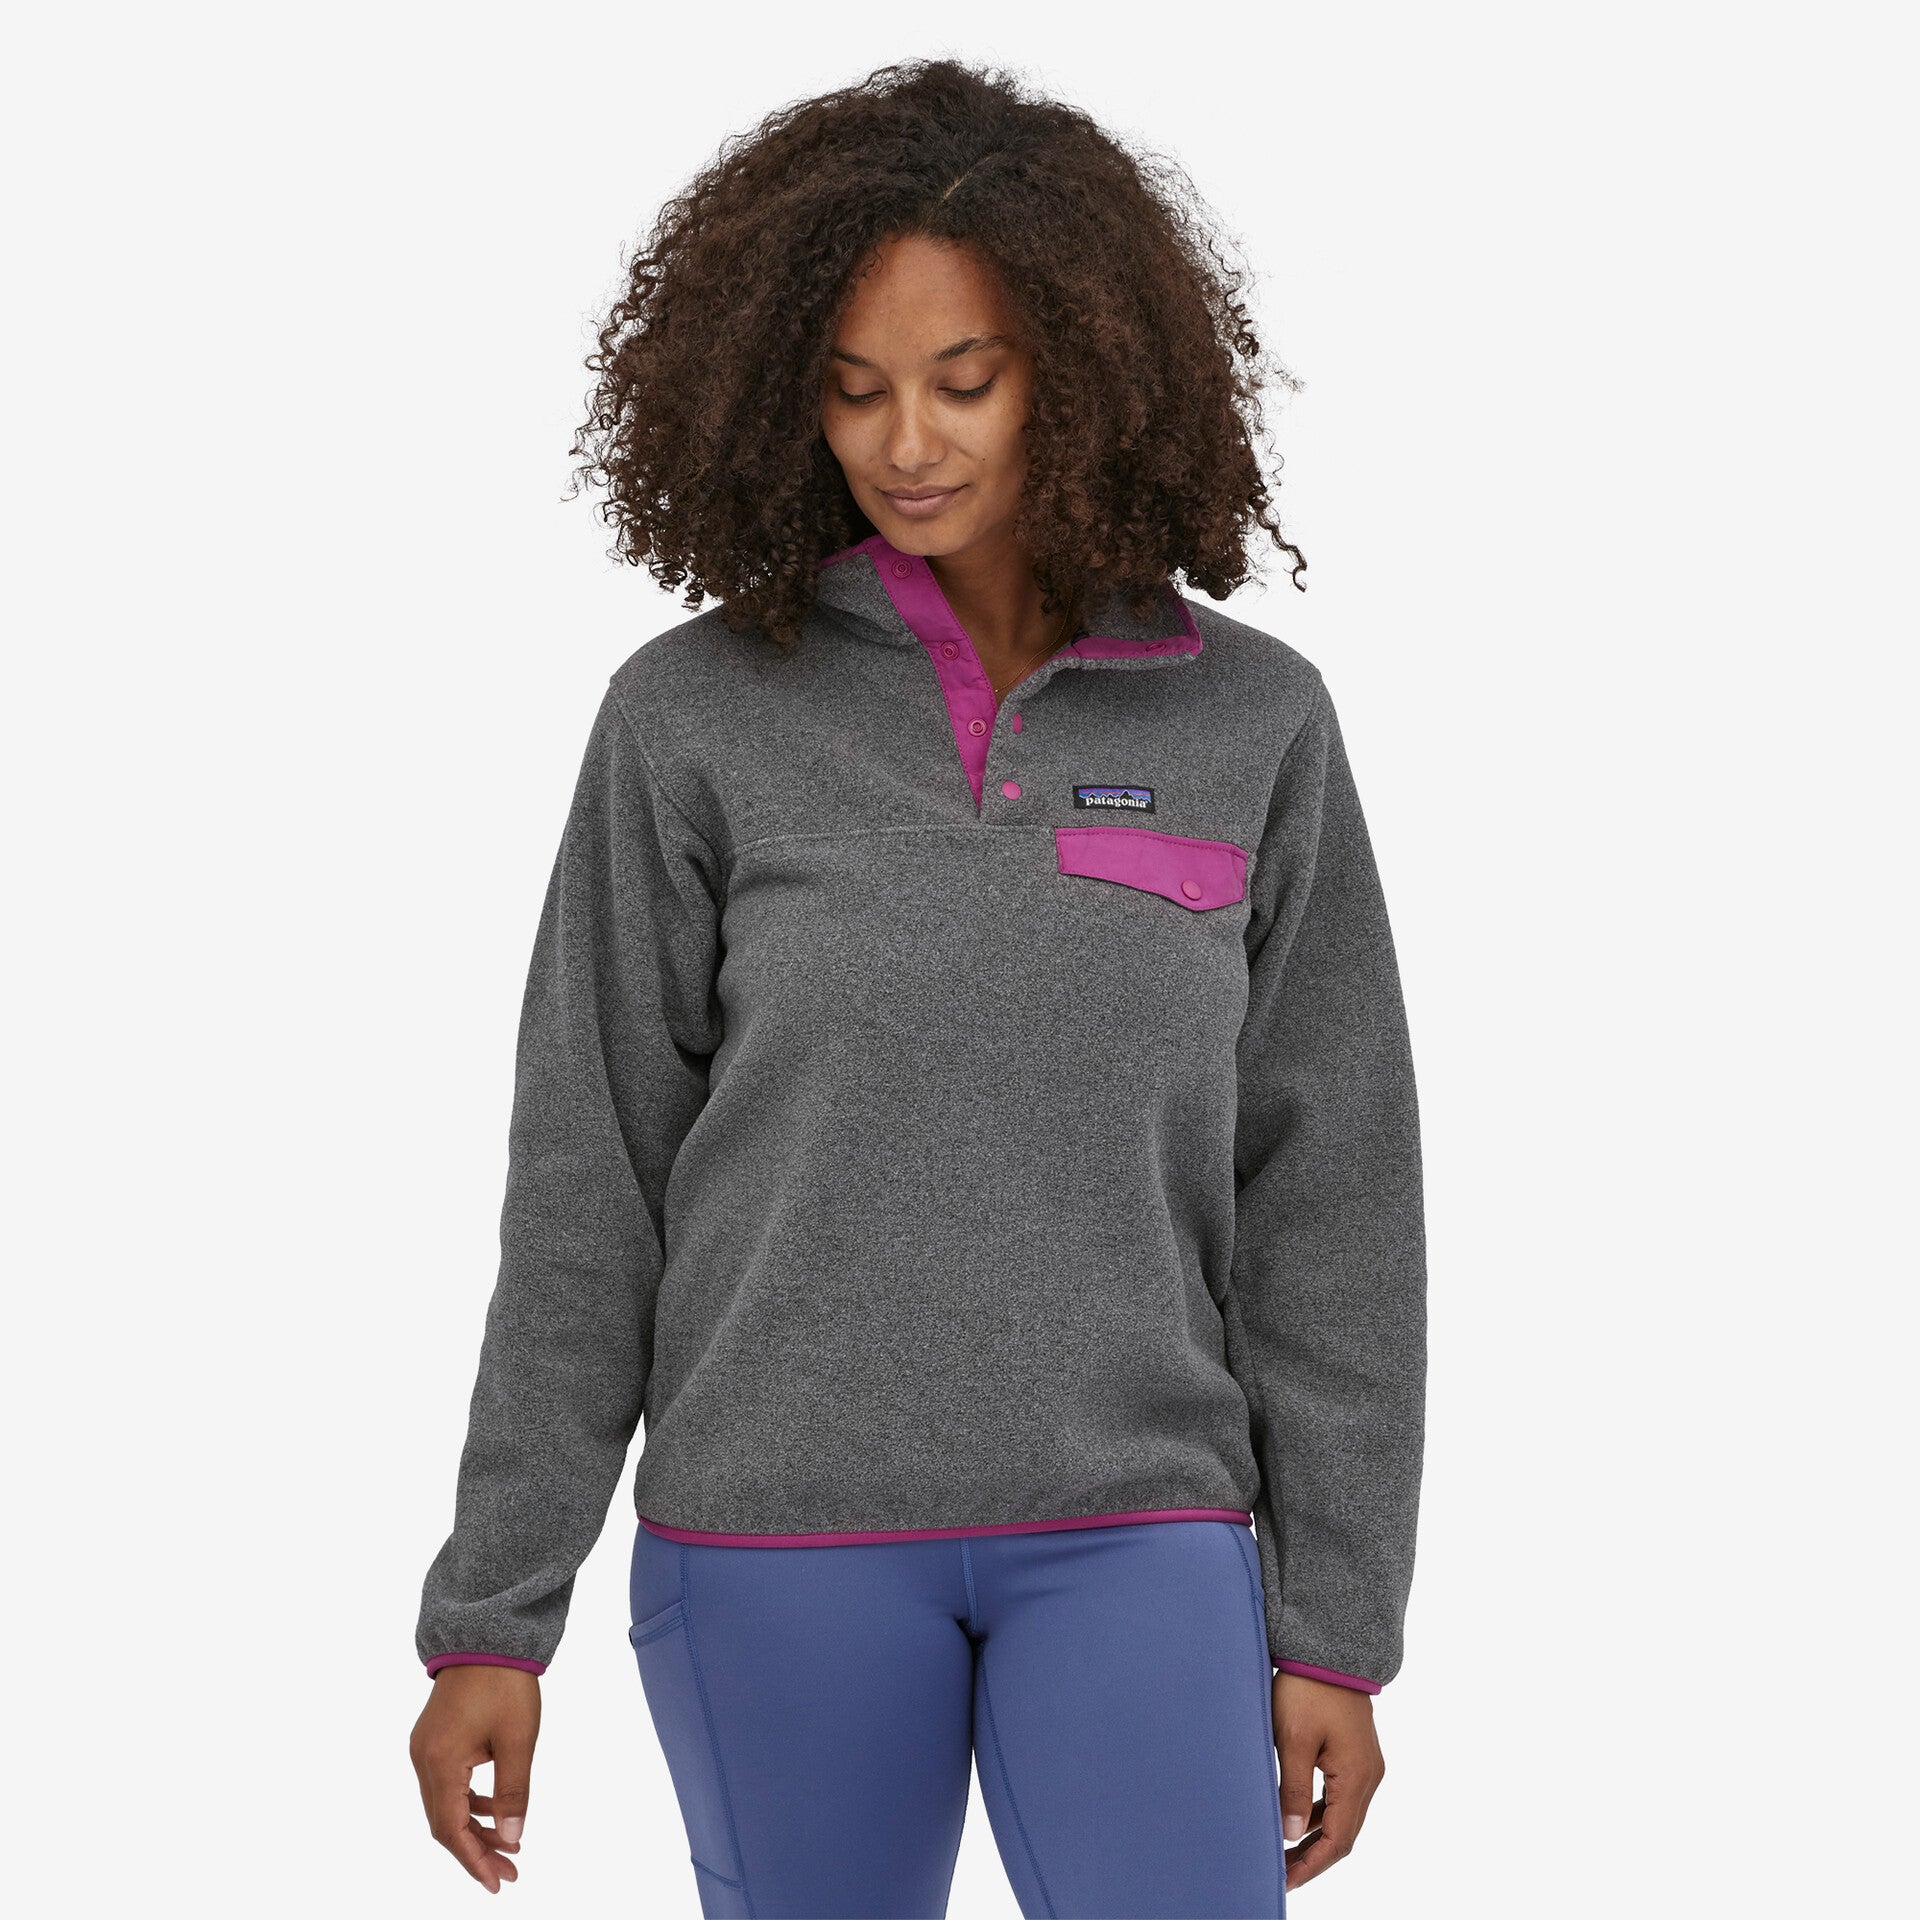 Patagonia Women's LightWeight Synchilla Snap-T PullOver